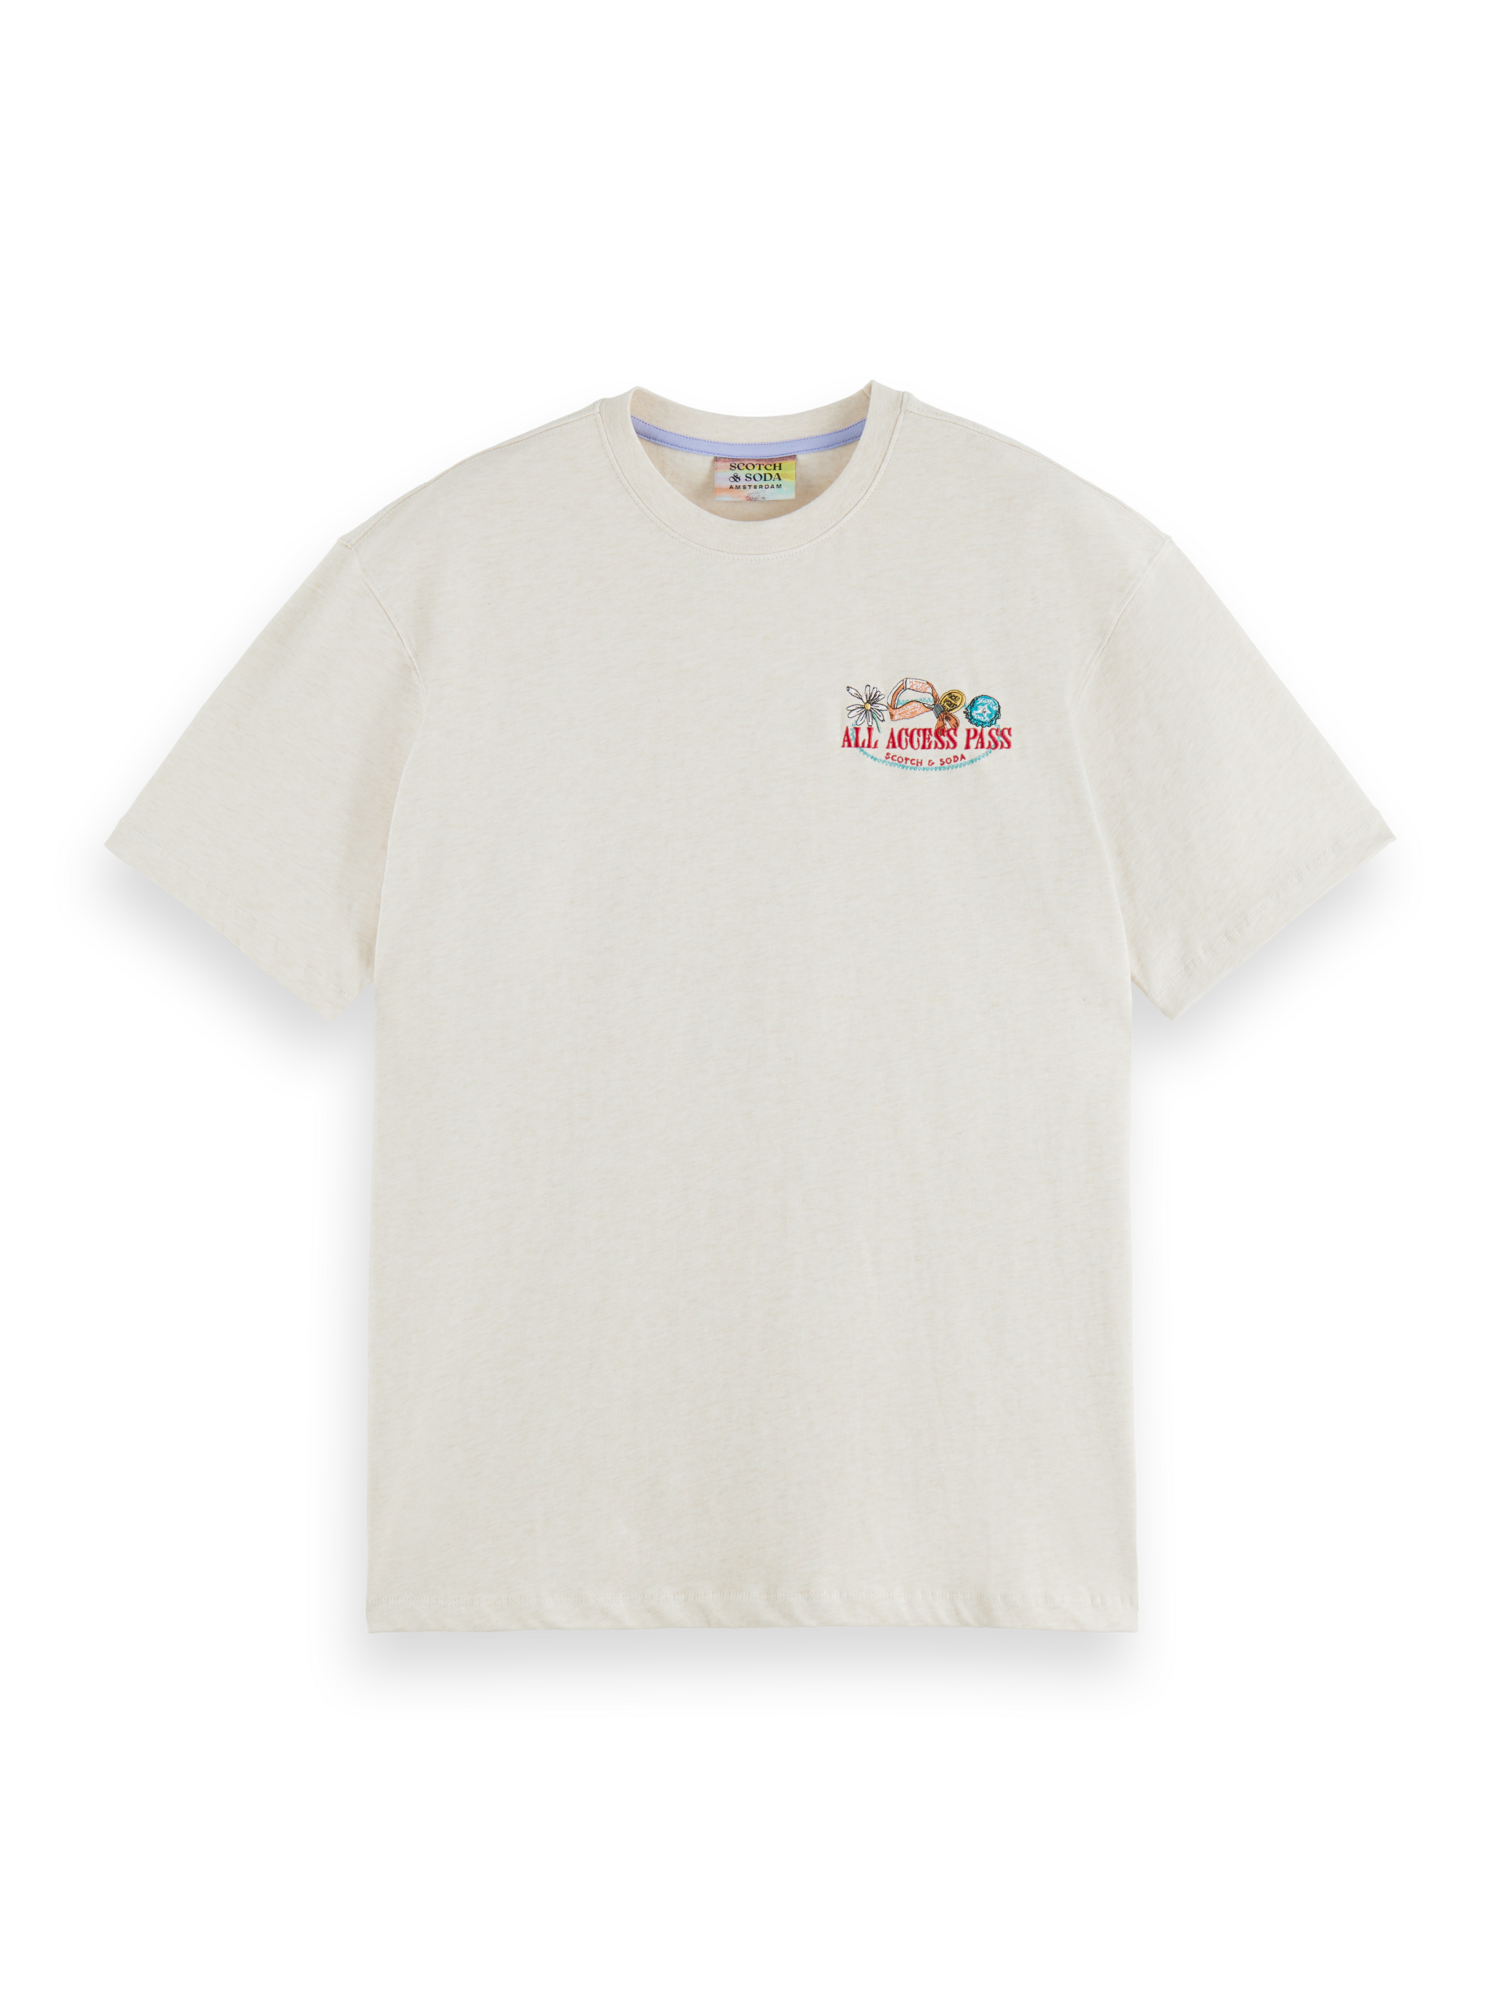 Embroided Melange Tee - Off White